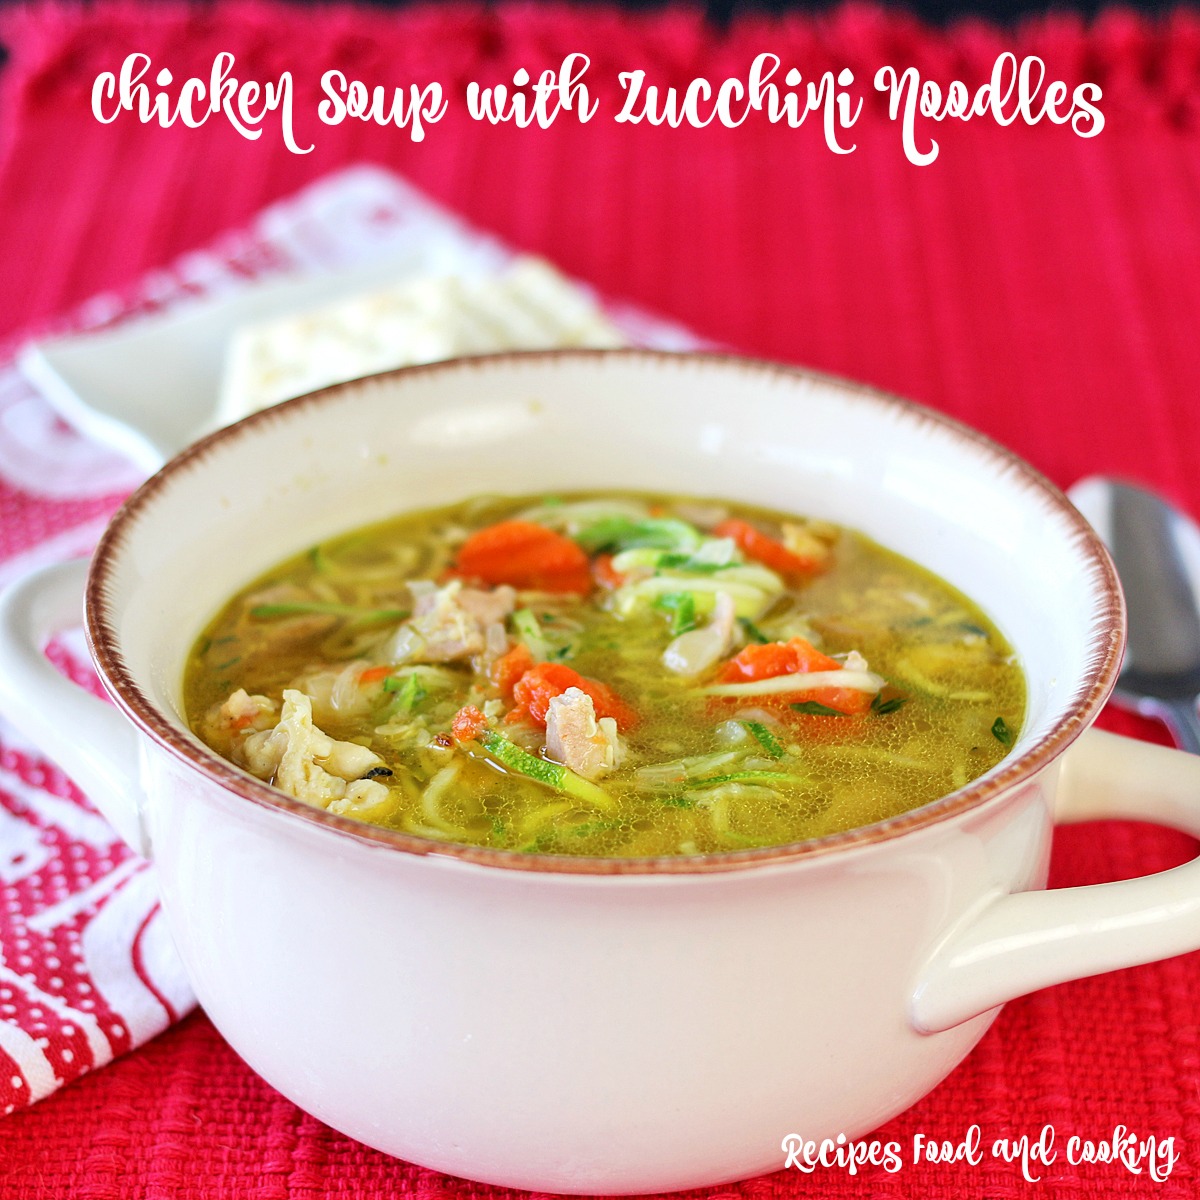 Chicken Soup with Zucchini Noodles